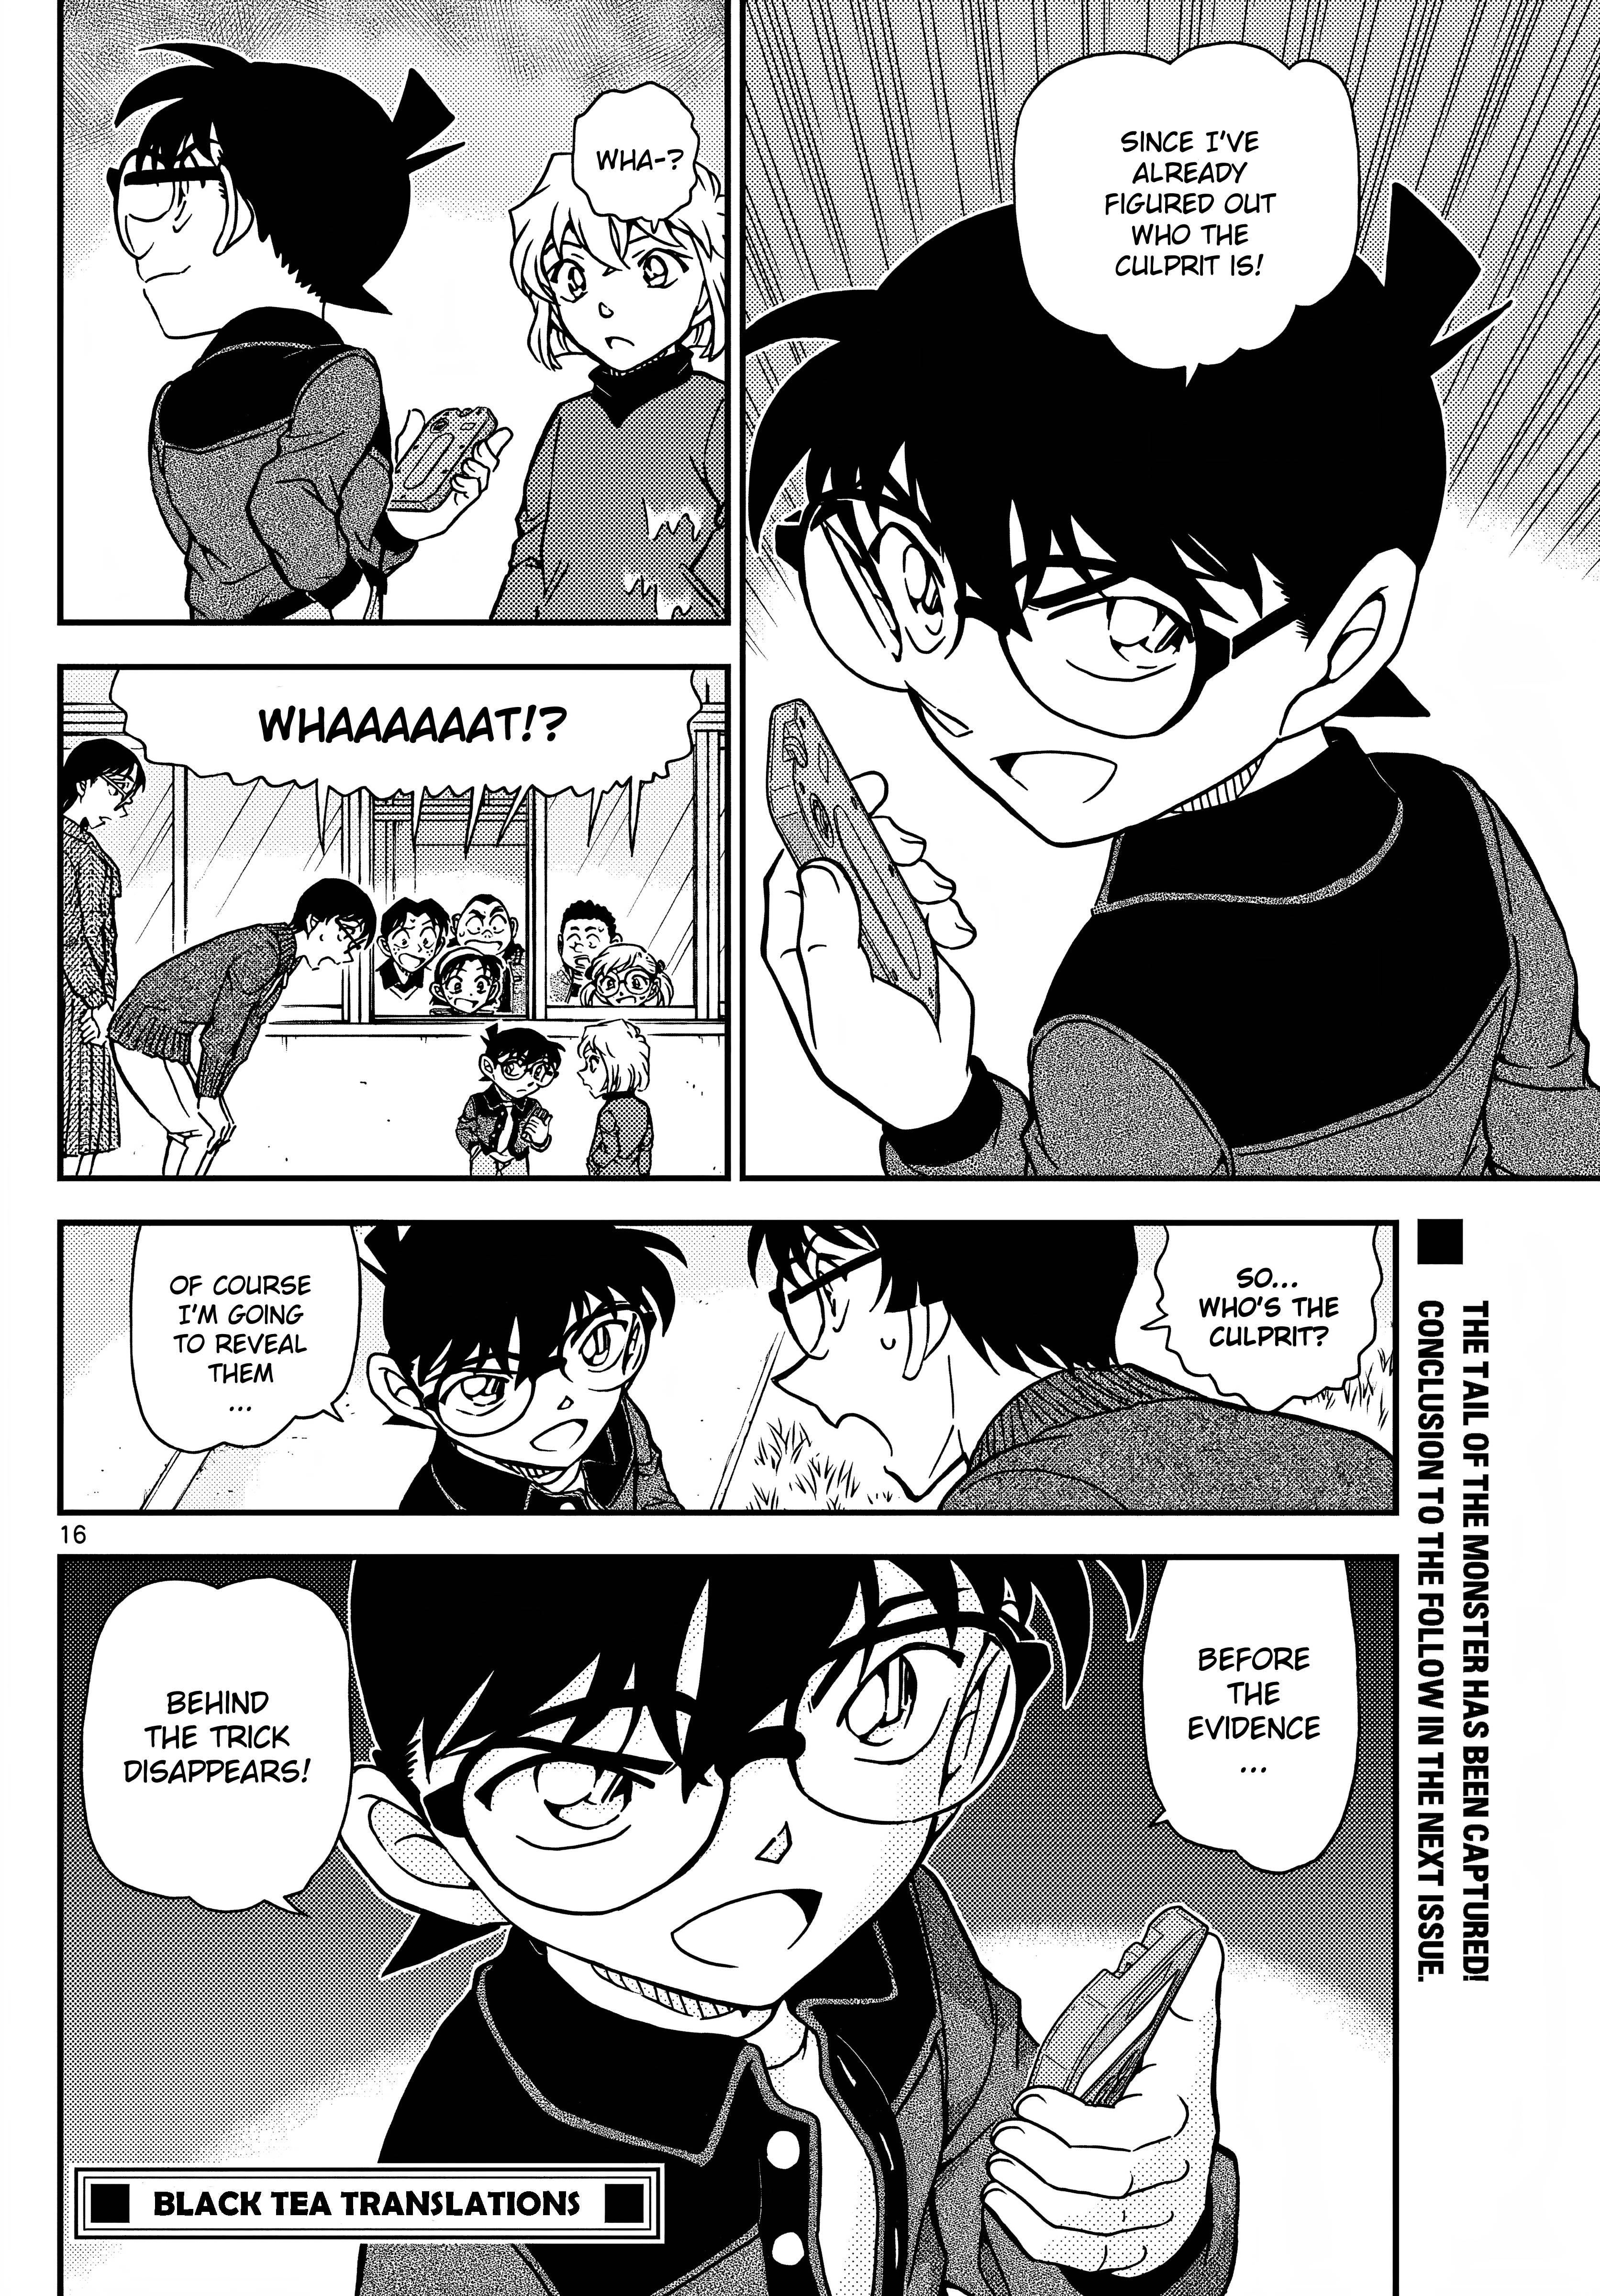 Detective Conan chapter 1111 page 18